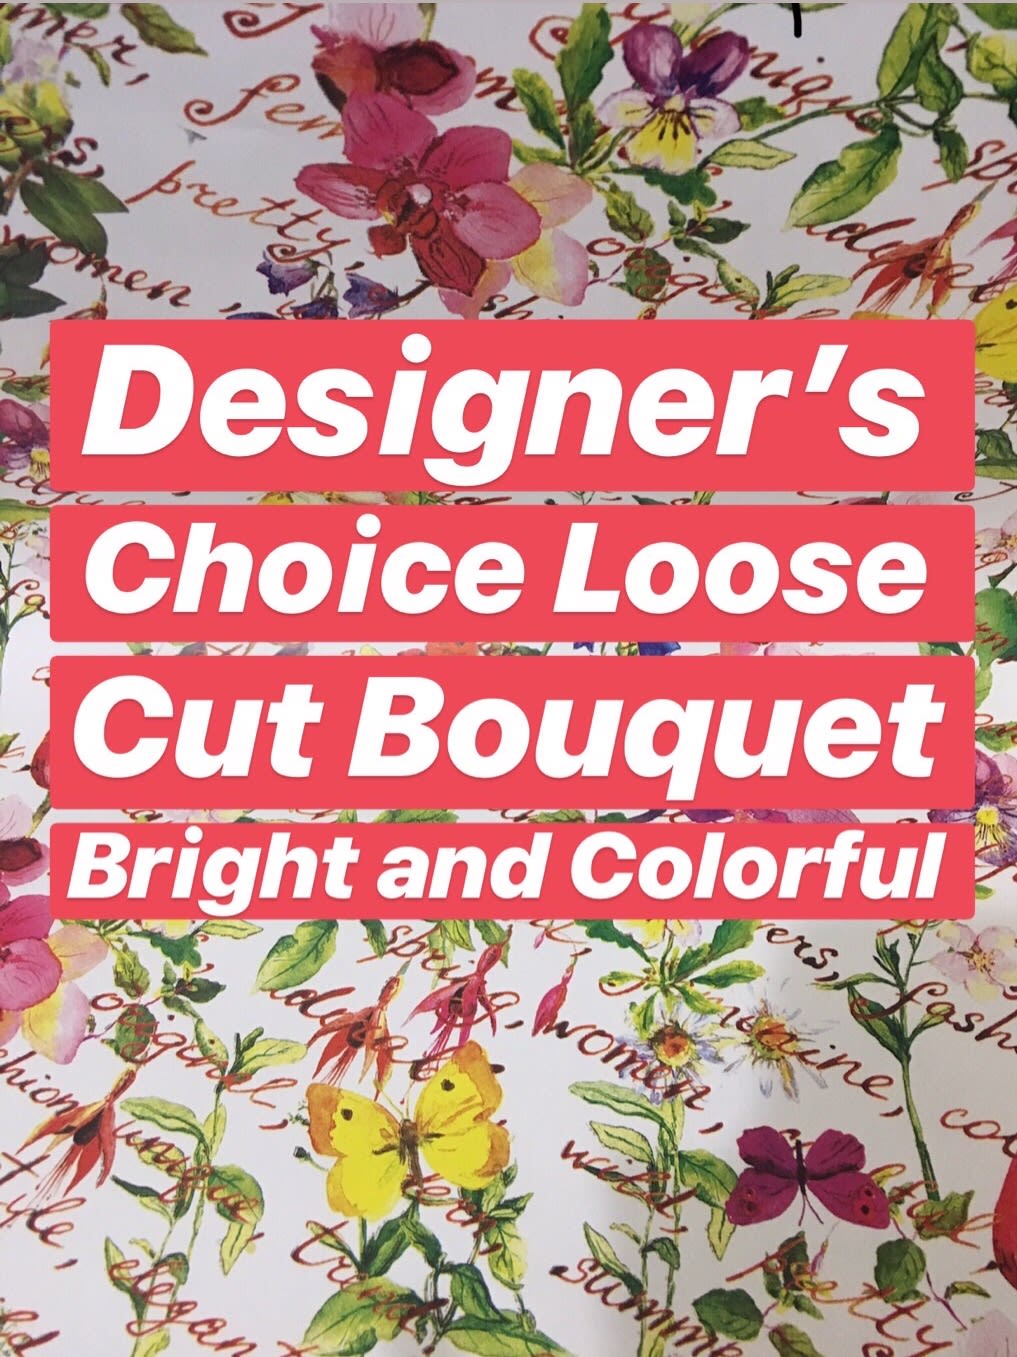 Designer's Choice Loose Cut Bouquet Bright and Colorful - We will use our freshest, colorful flowers available to make you a bright loose cut bouquet.  (Does not include vase)